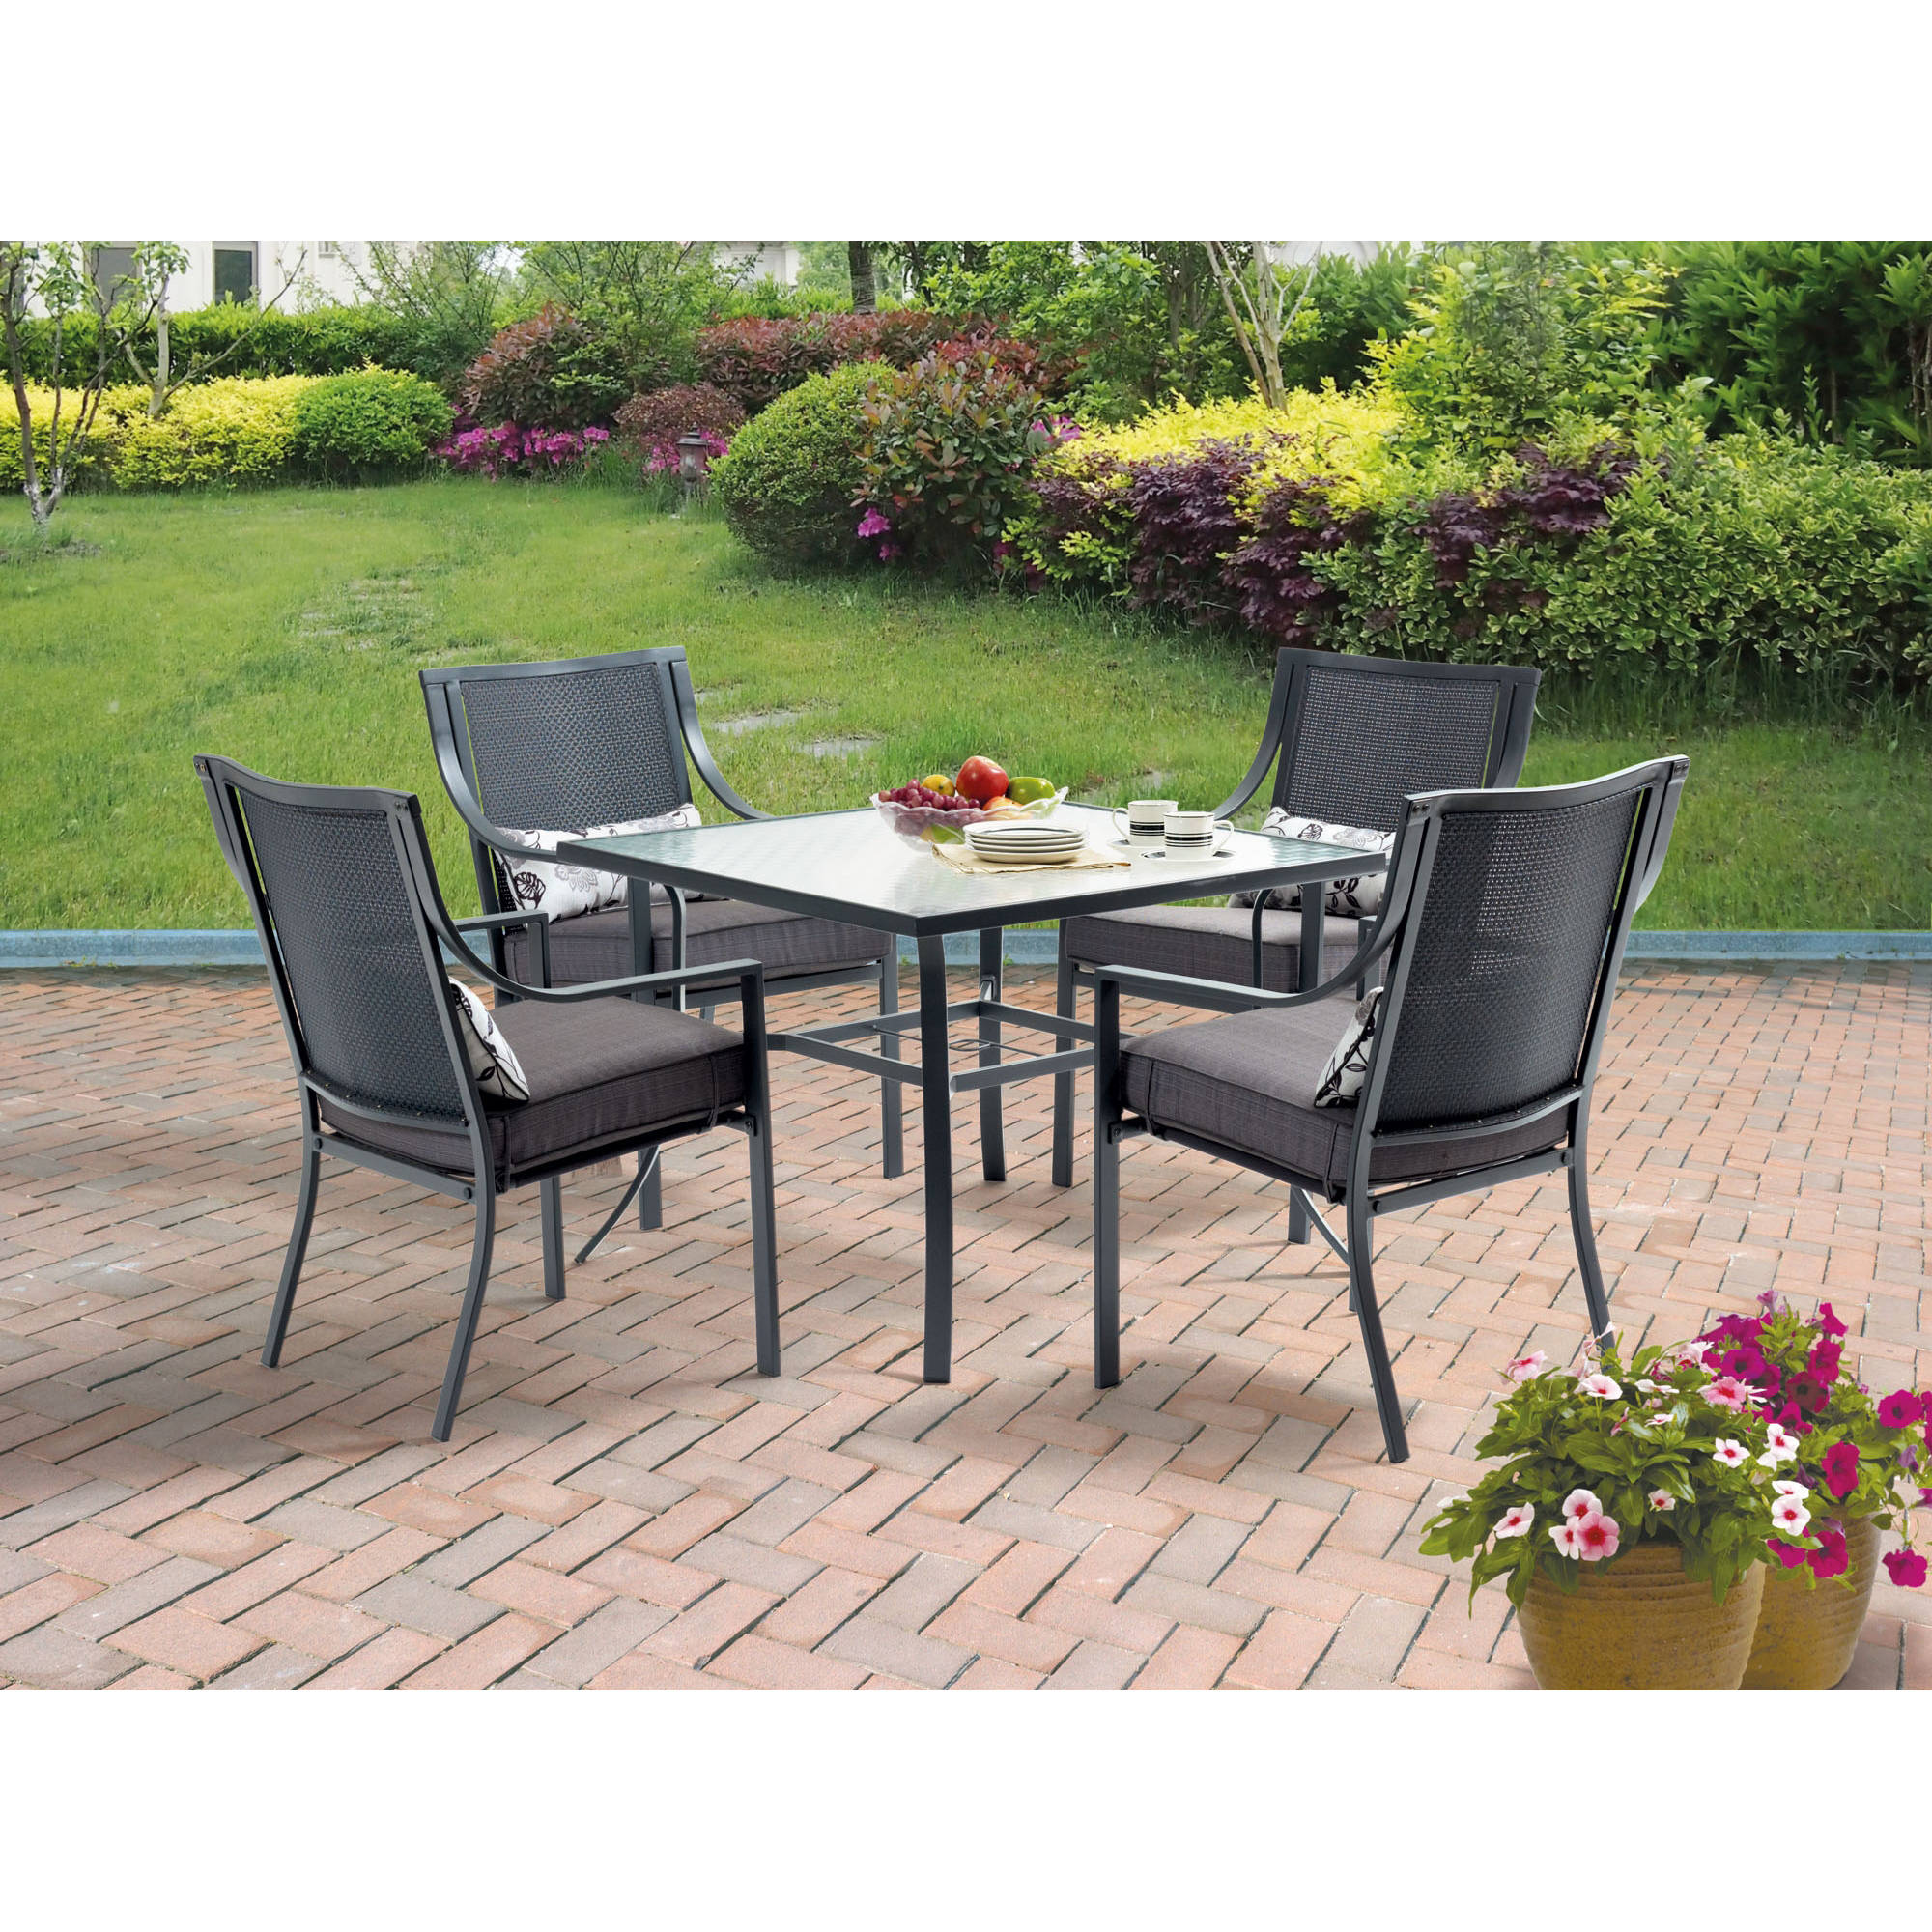 Mainstays Alexandra Square Outdoor Patio Dining Set, Cushioned Metal 5 Piece, Grey - image 1 of 9